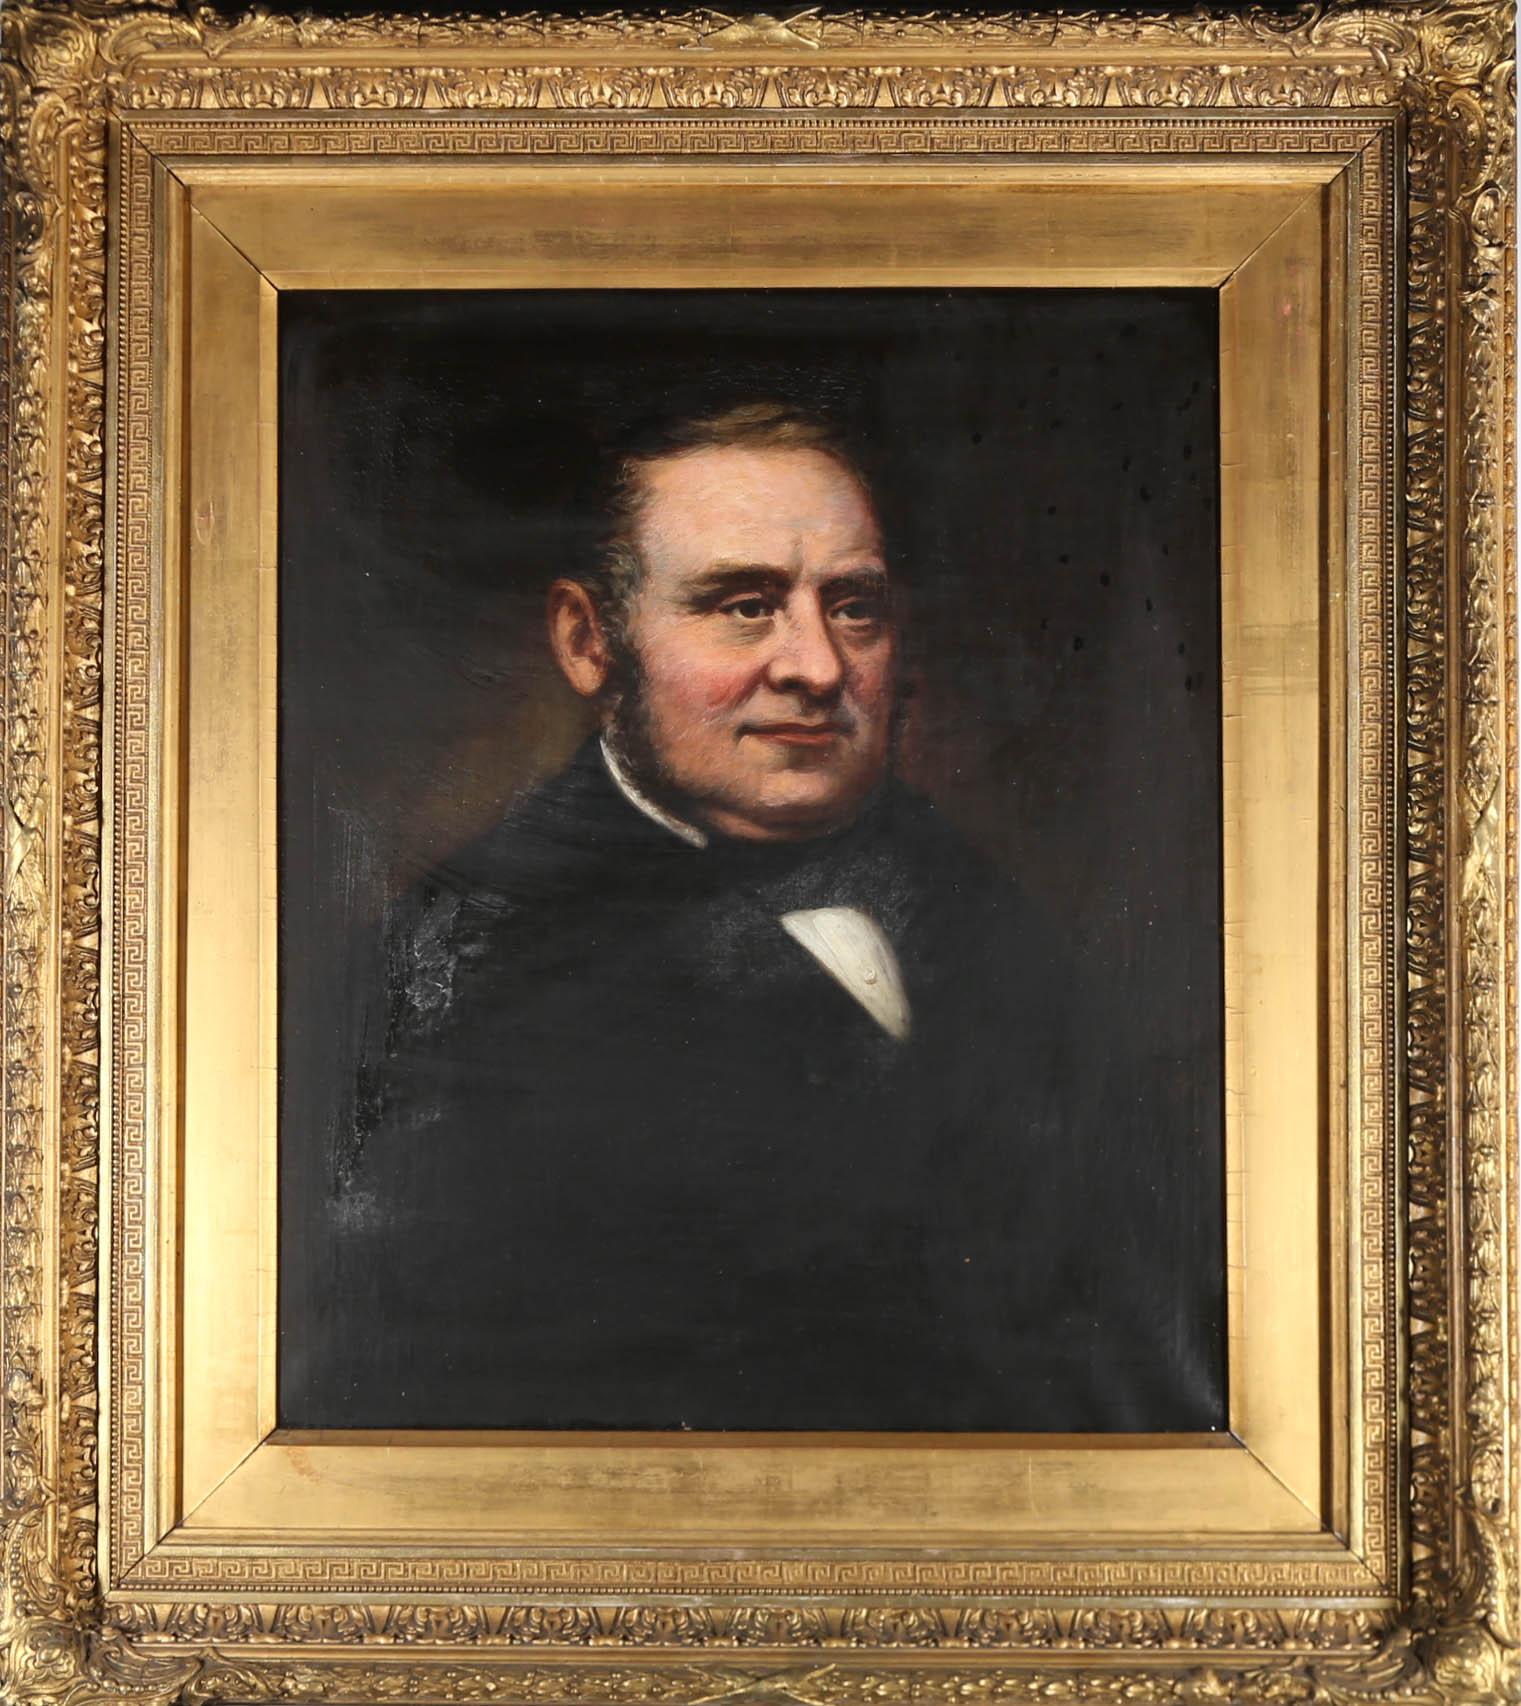 Unknown Portrait Painting - 19th Century Oil - A Portly Gentleman